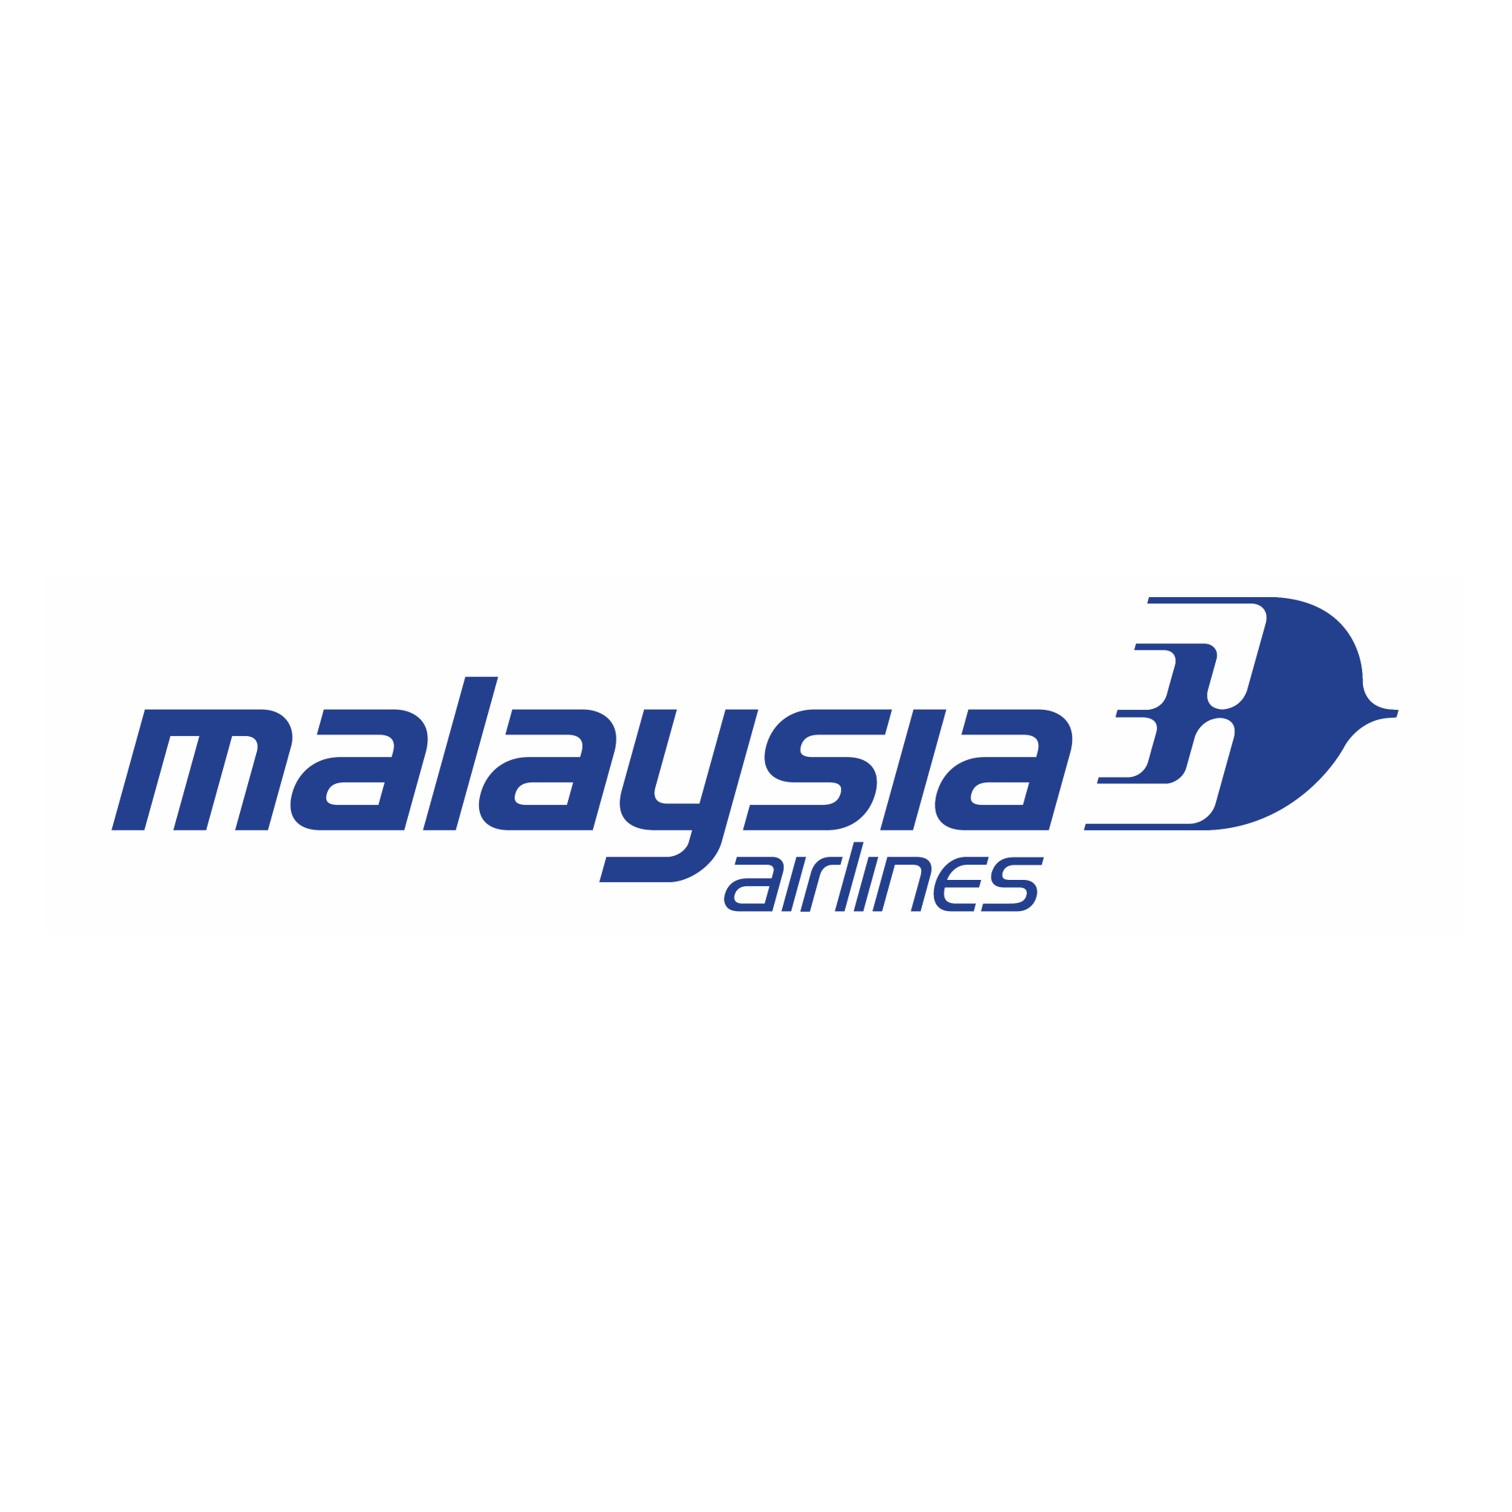 Company logo of Malaysia Airlines